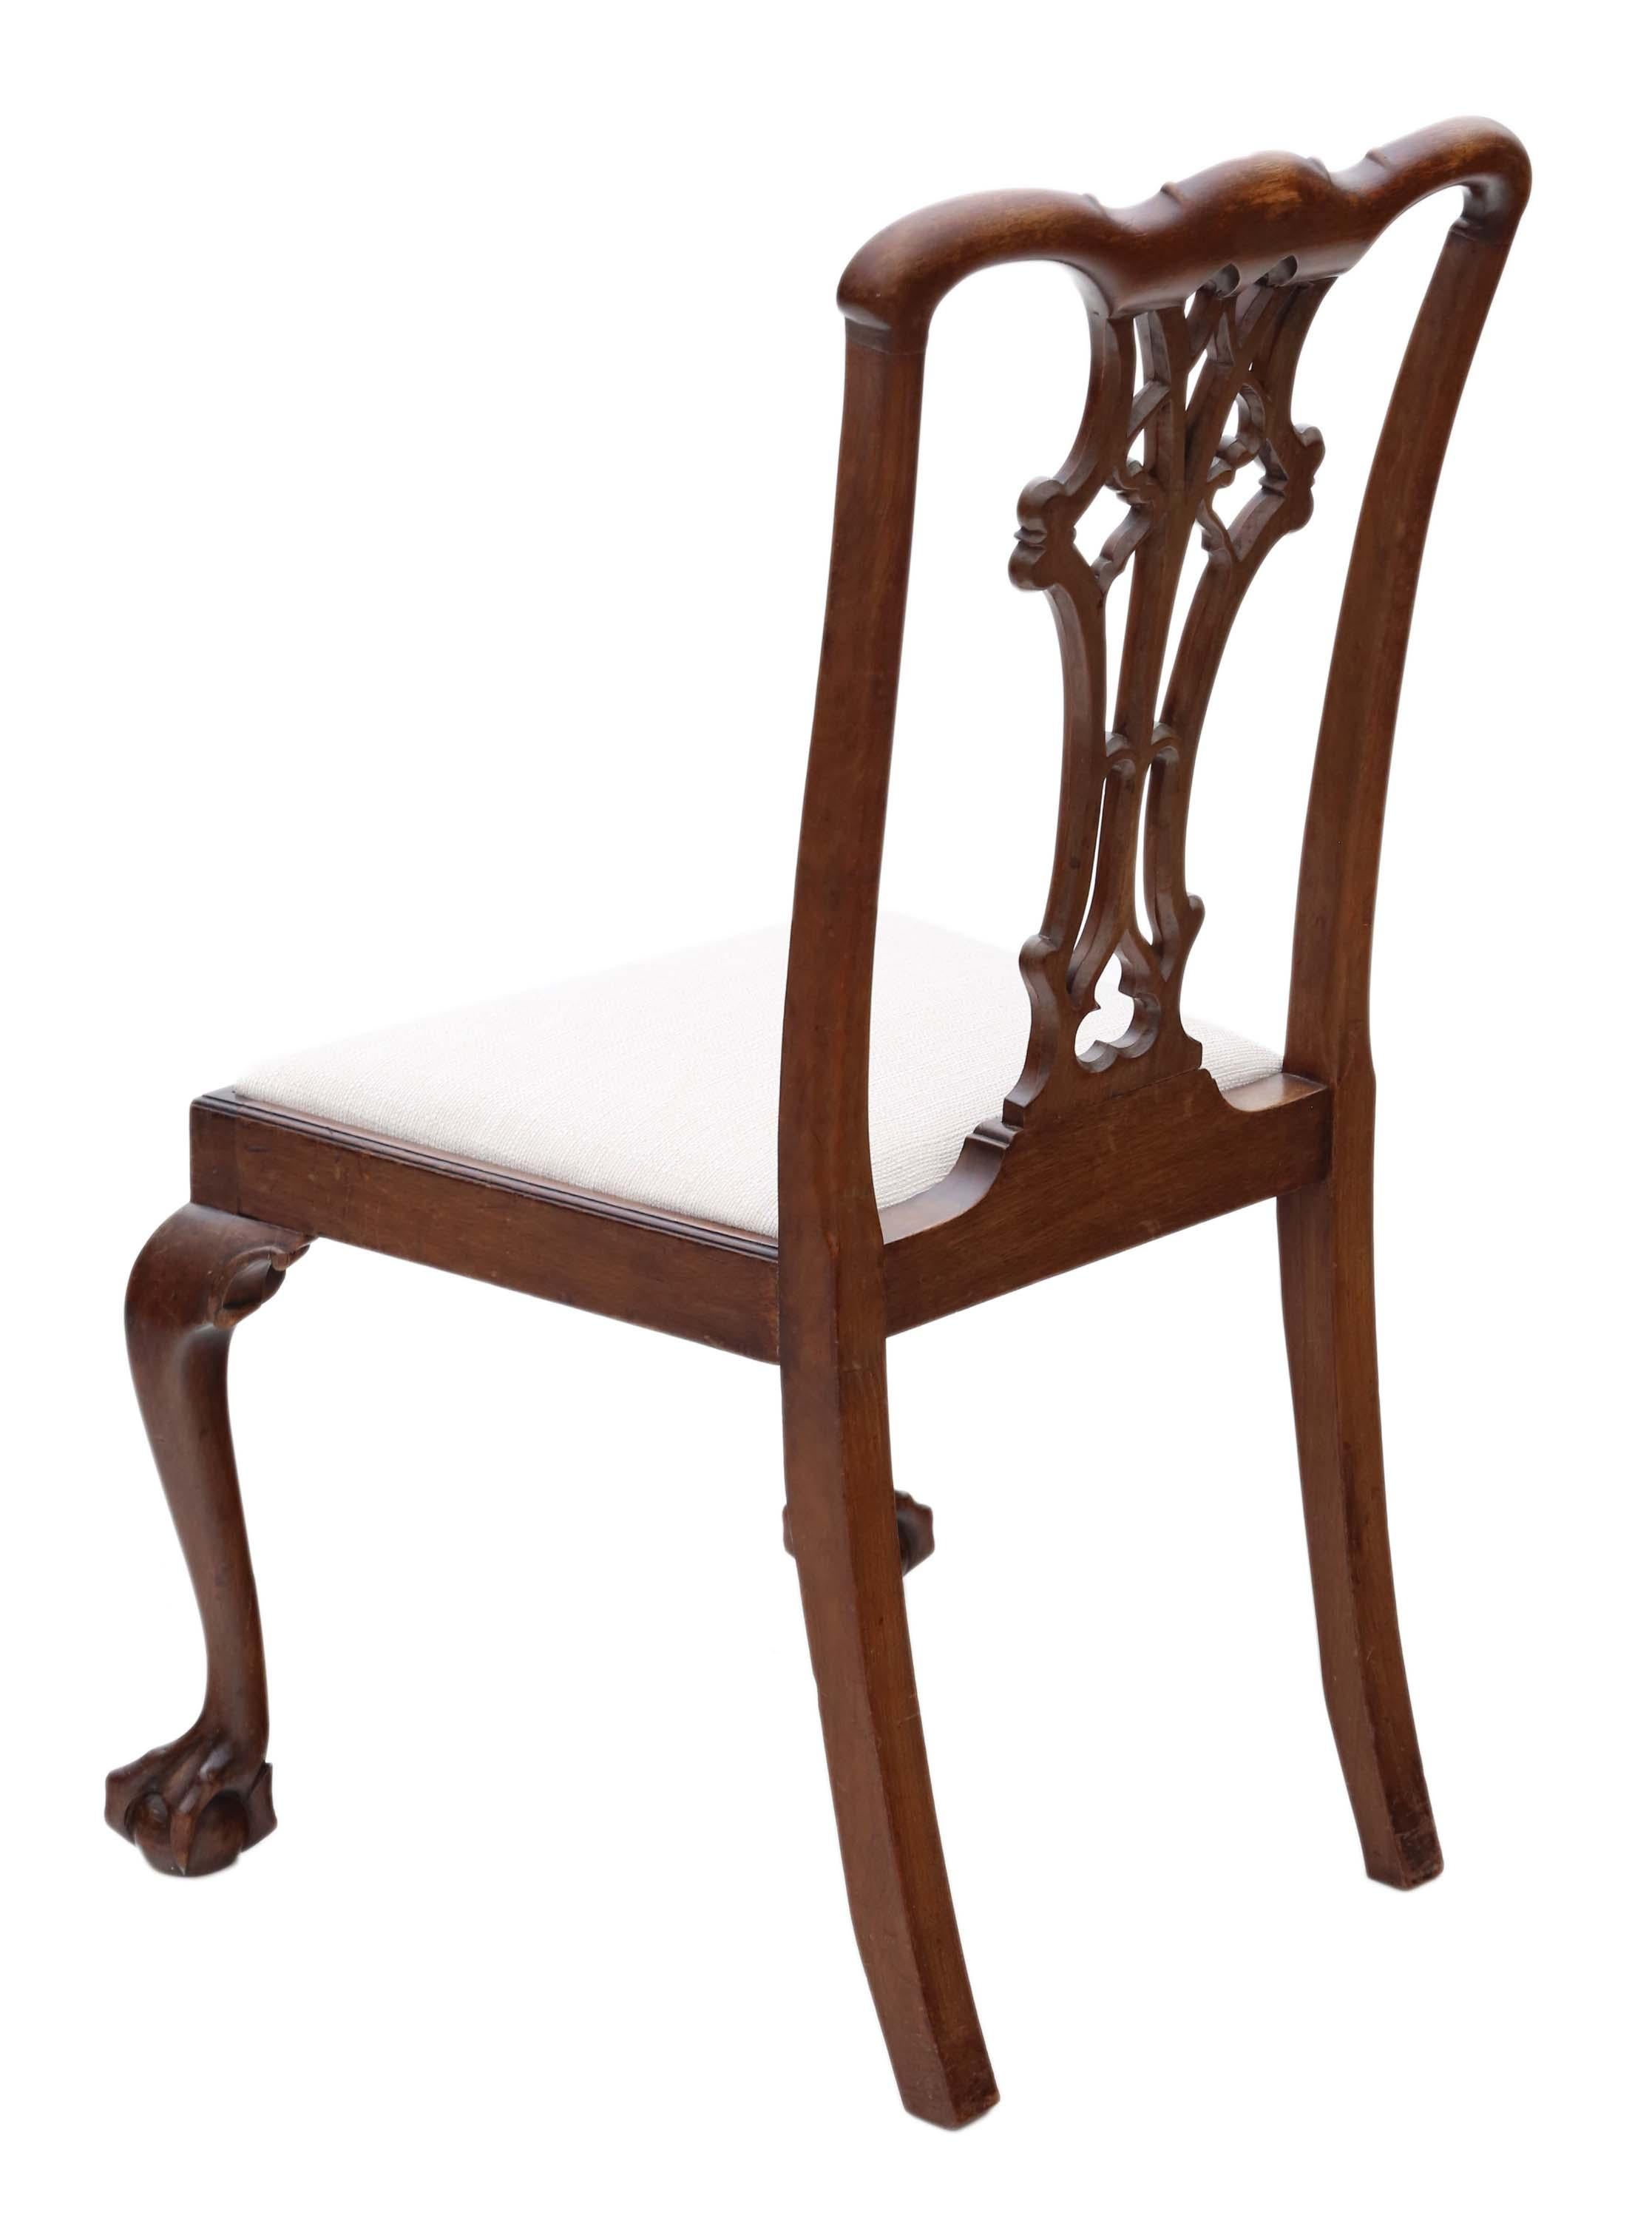 Georgian Revival Mahogany Dining Chairs: Set of 8 (6+2), Antique Quality, C1910 For Sale 6